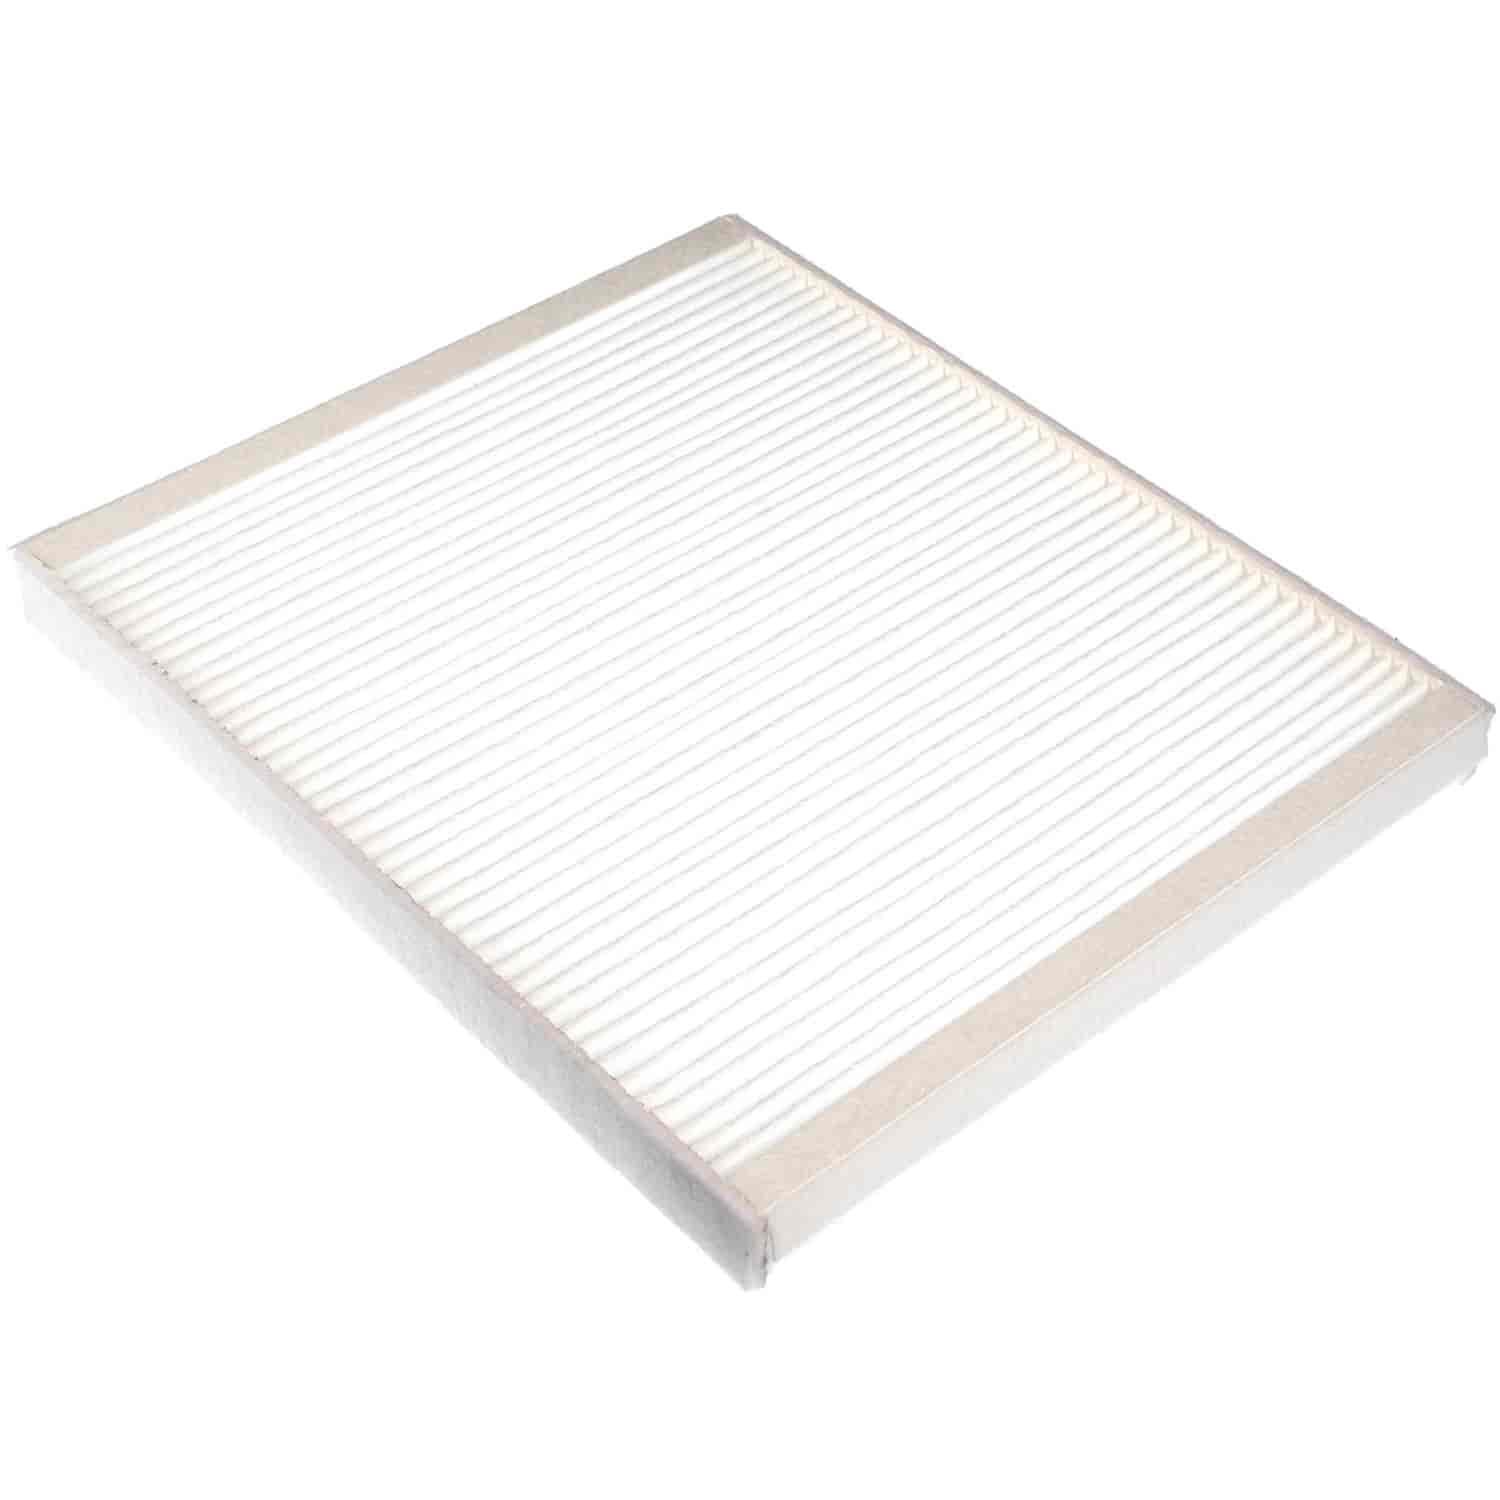 Mahle Cabin Air Filter Chevy Aveo 1.6L 2004-2009